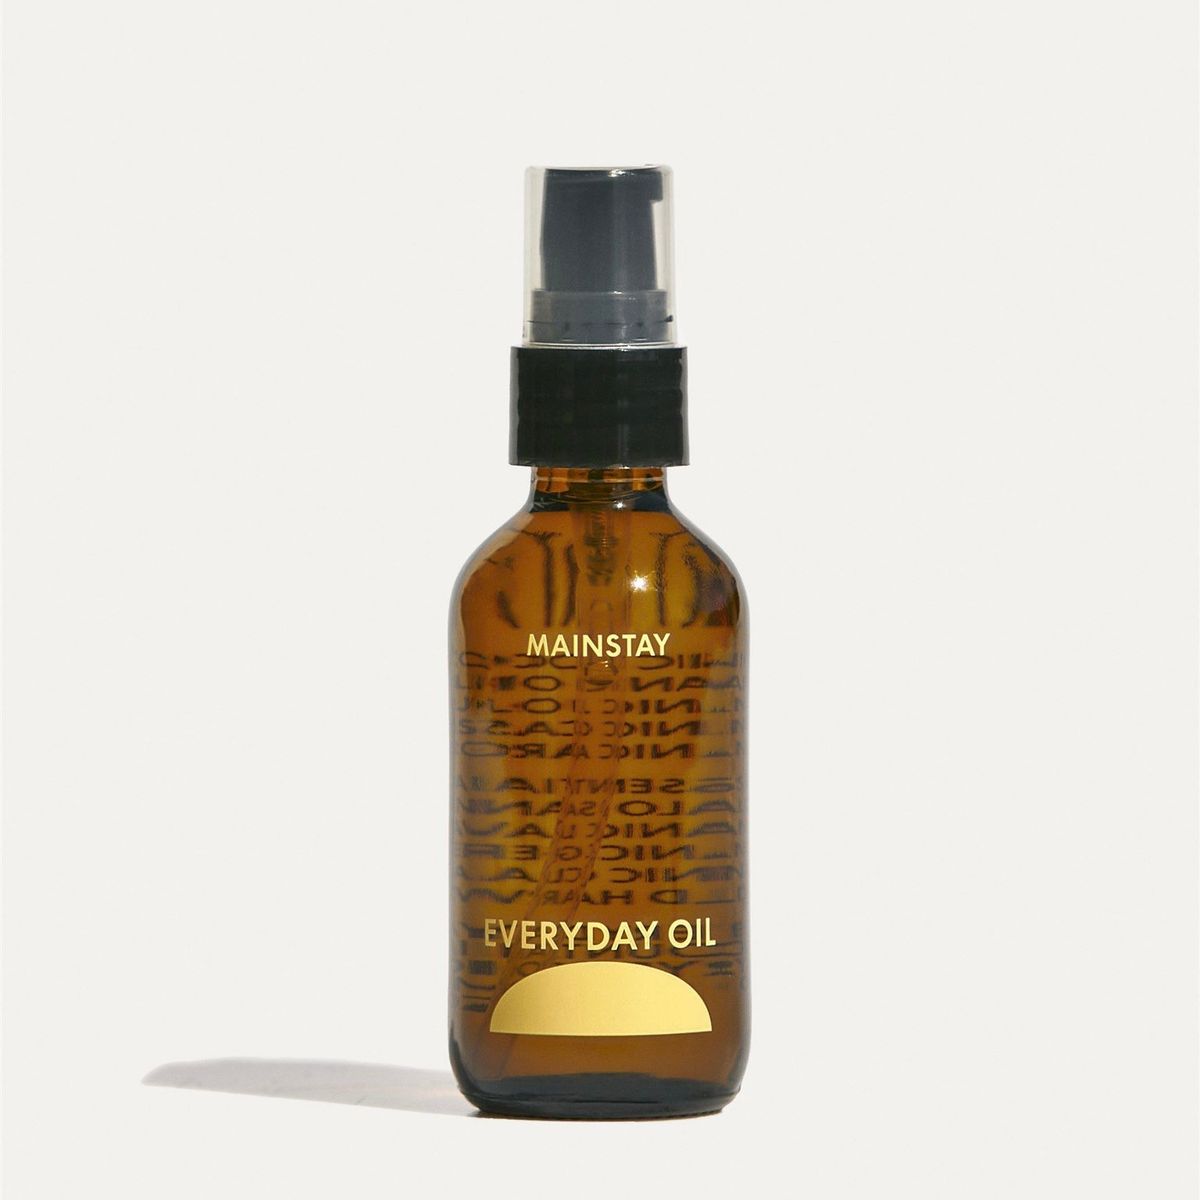 Small bottle of Everyday Oil